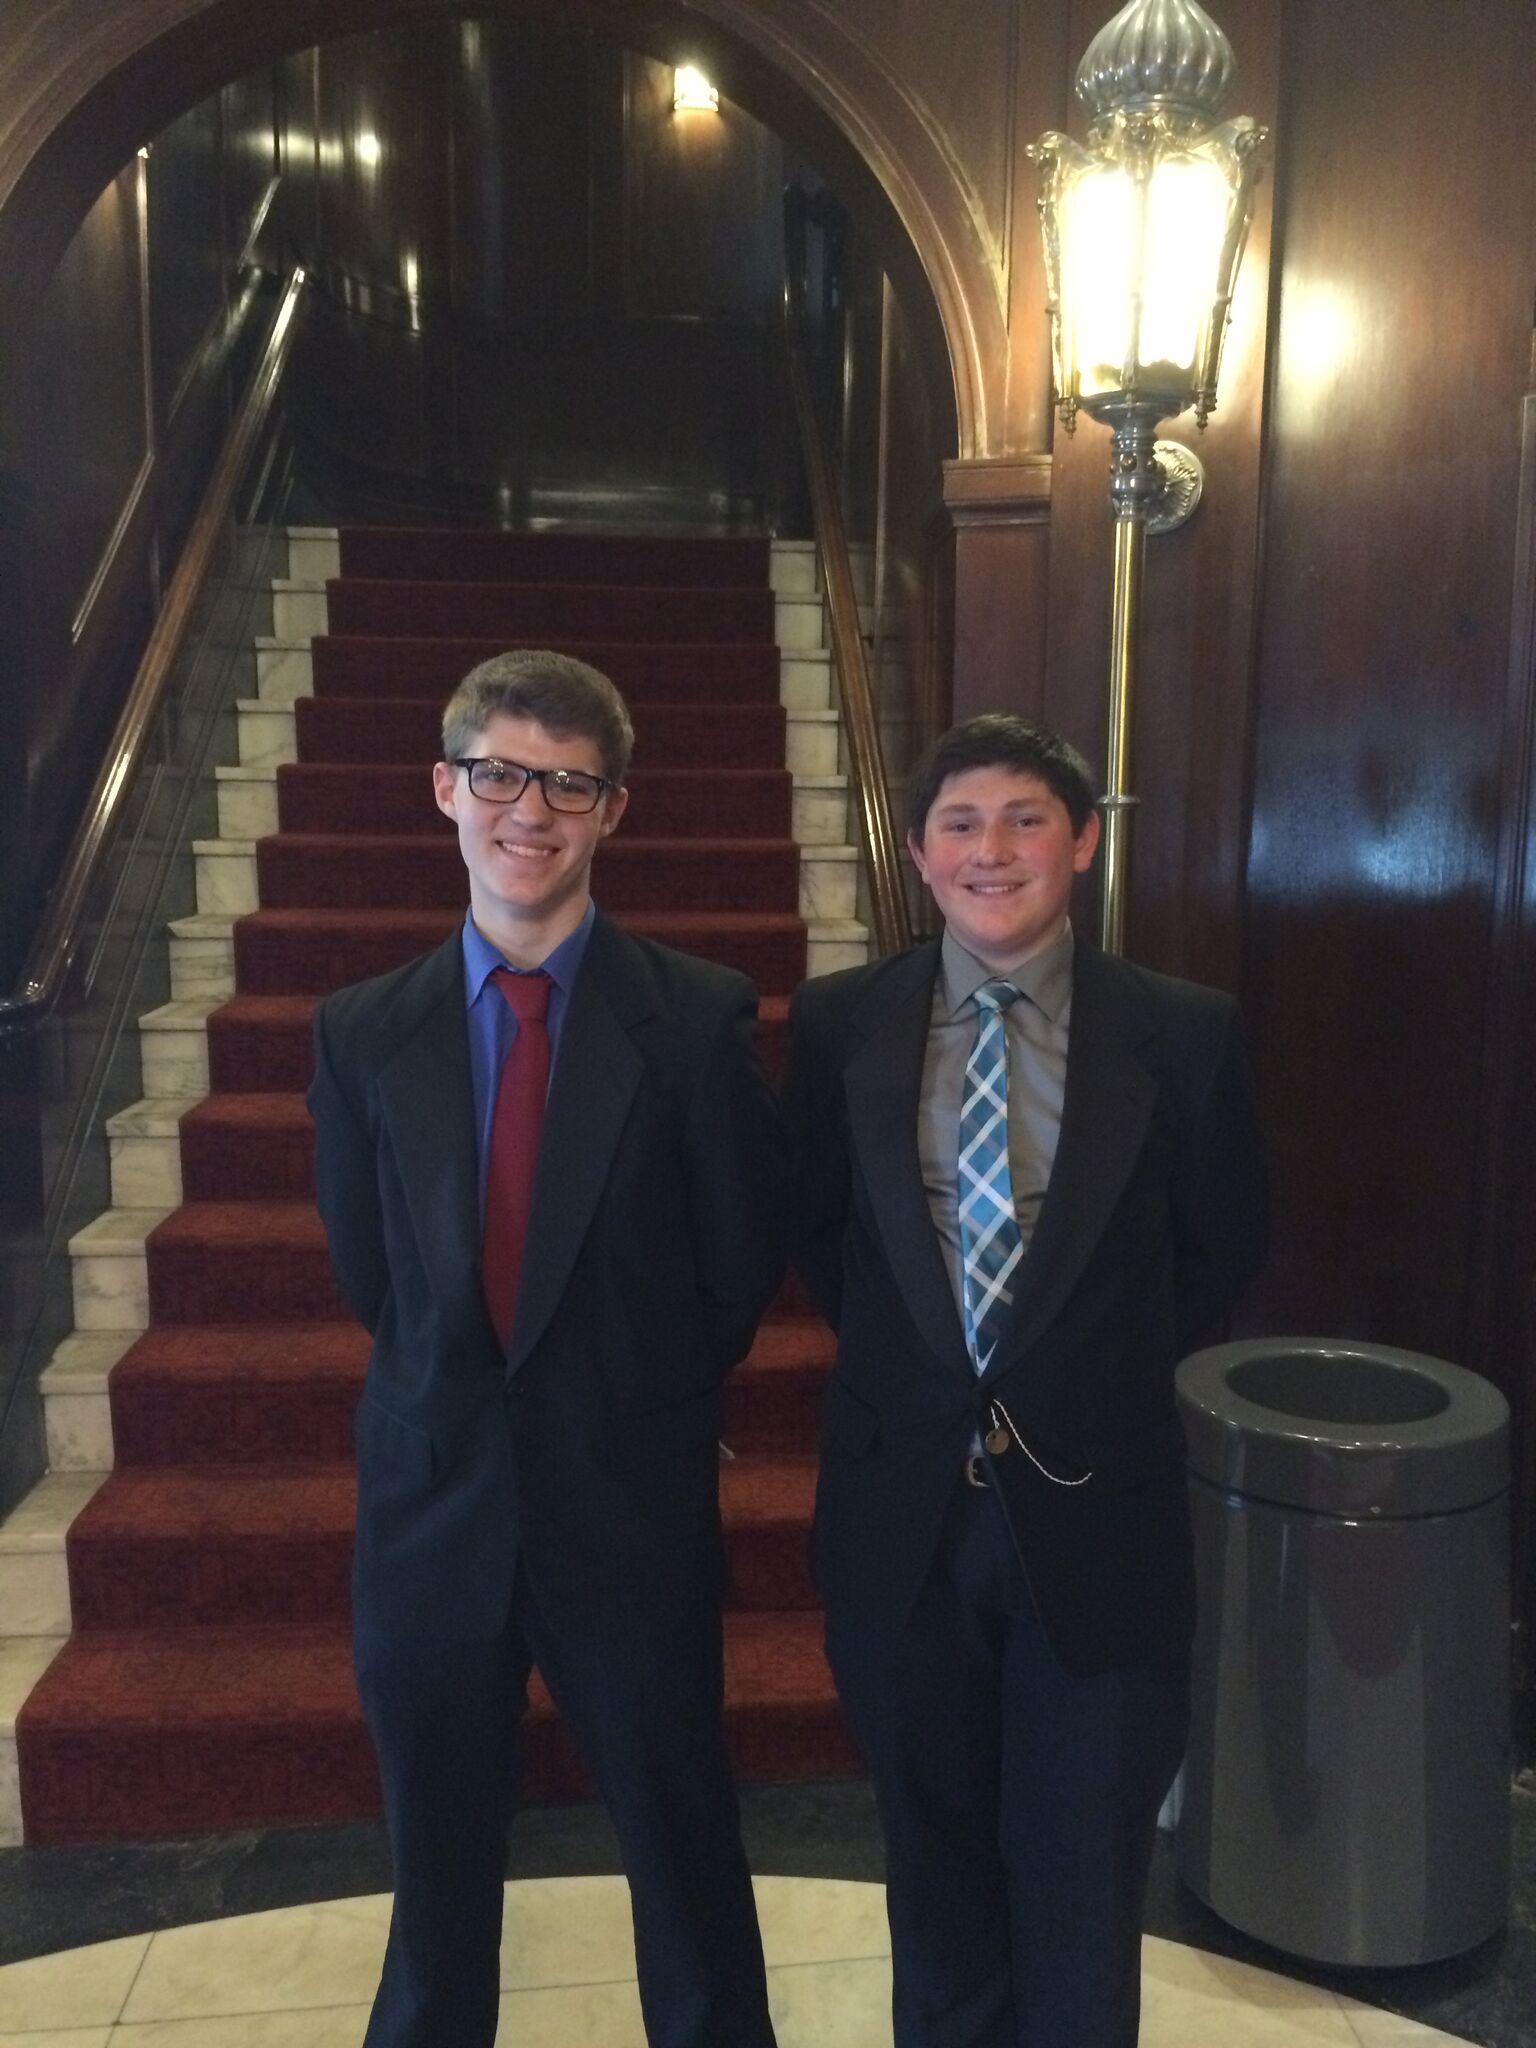 Band members Ryan Thomas and Andrew Flynn, both juniors and members of The Eclipse staff, enjoy the beauty of Orchestra Hall in Detroit.